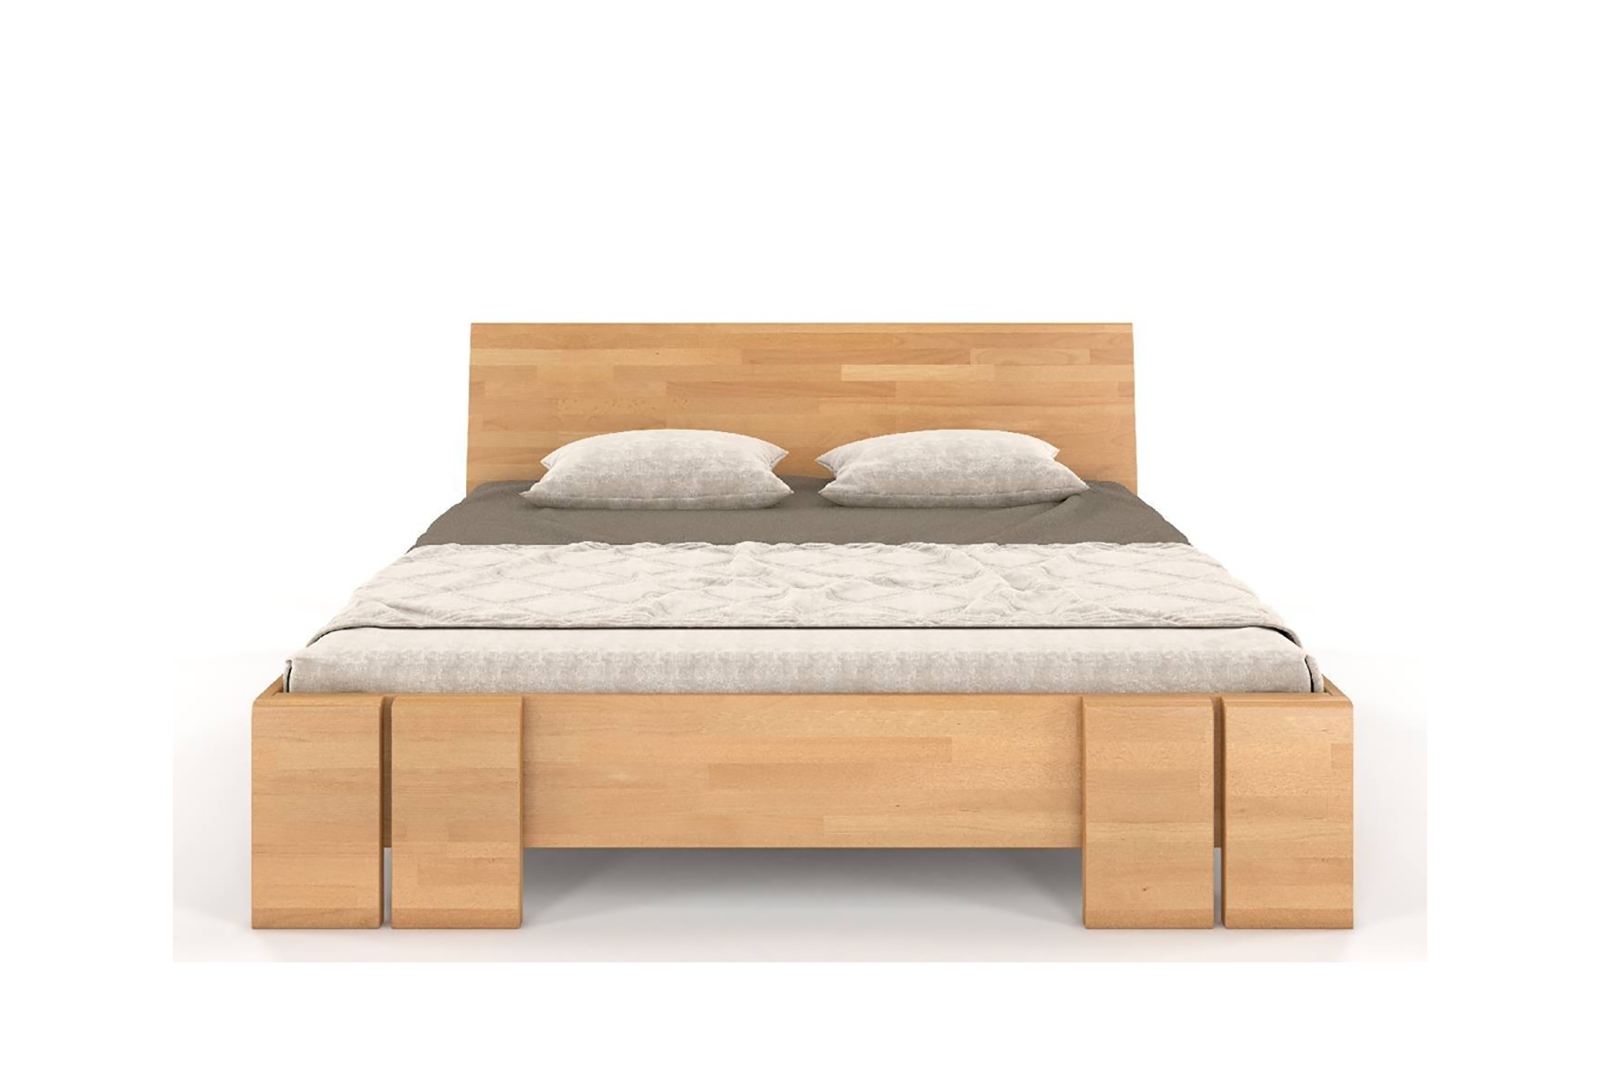 WOODEN BEECH BED WITH A BOX FOR BEDDING SKANDICA VESTRE MAXI AND ST